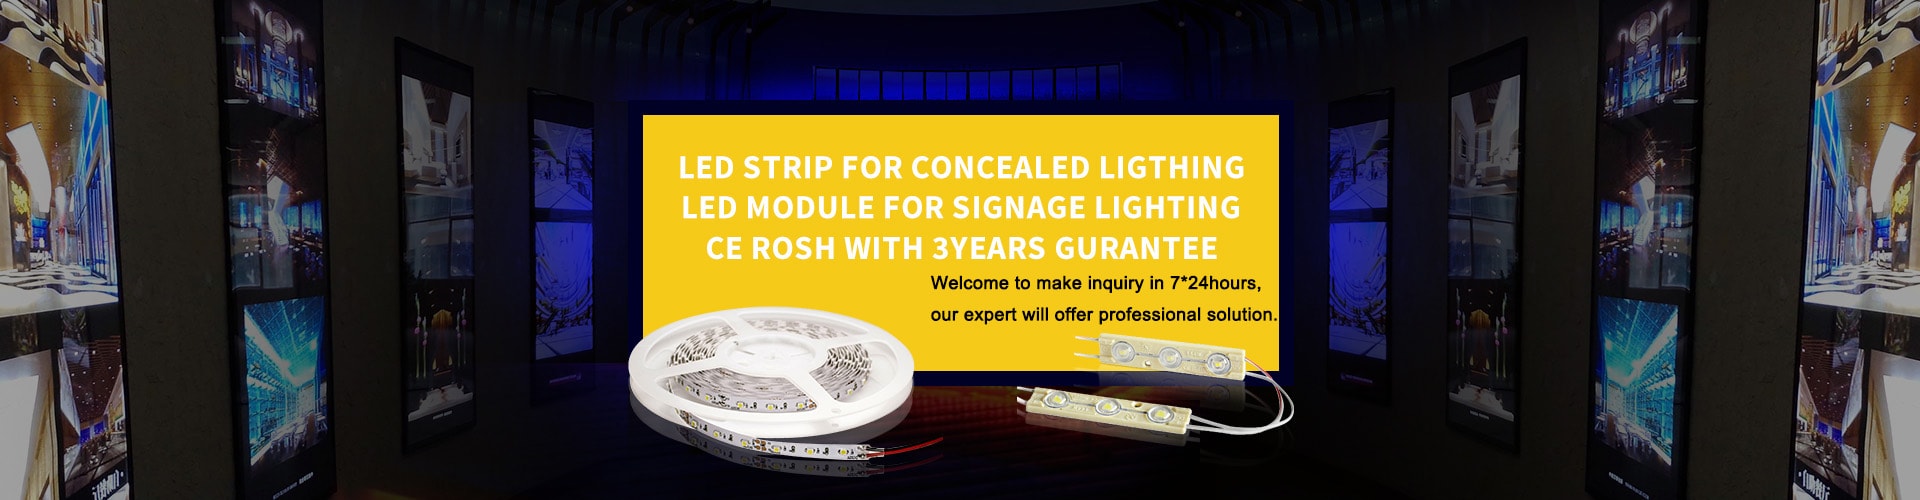 MSSLED focus on produce high cost performance led strip light,led neon flex and led modules and accessories.